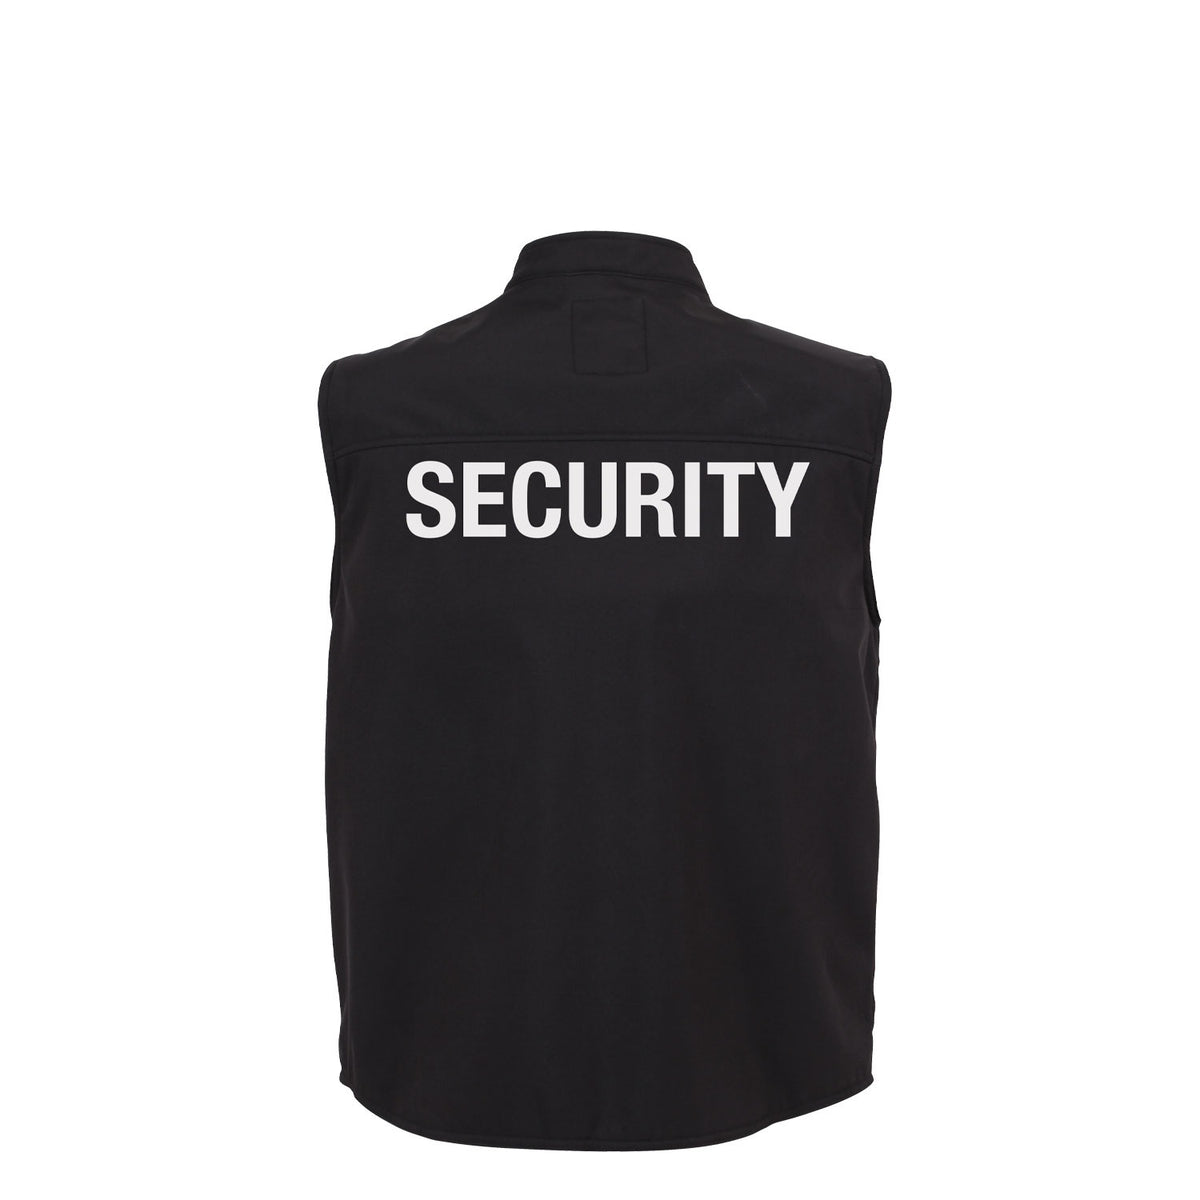 Rothco Concealed Carry Soft Shell Security Vest - Black